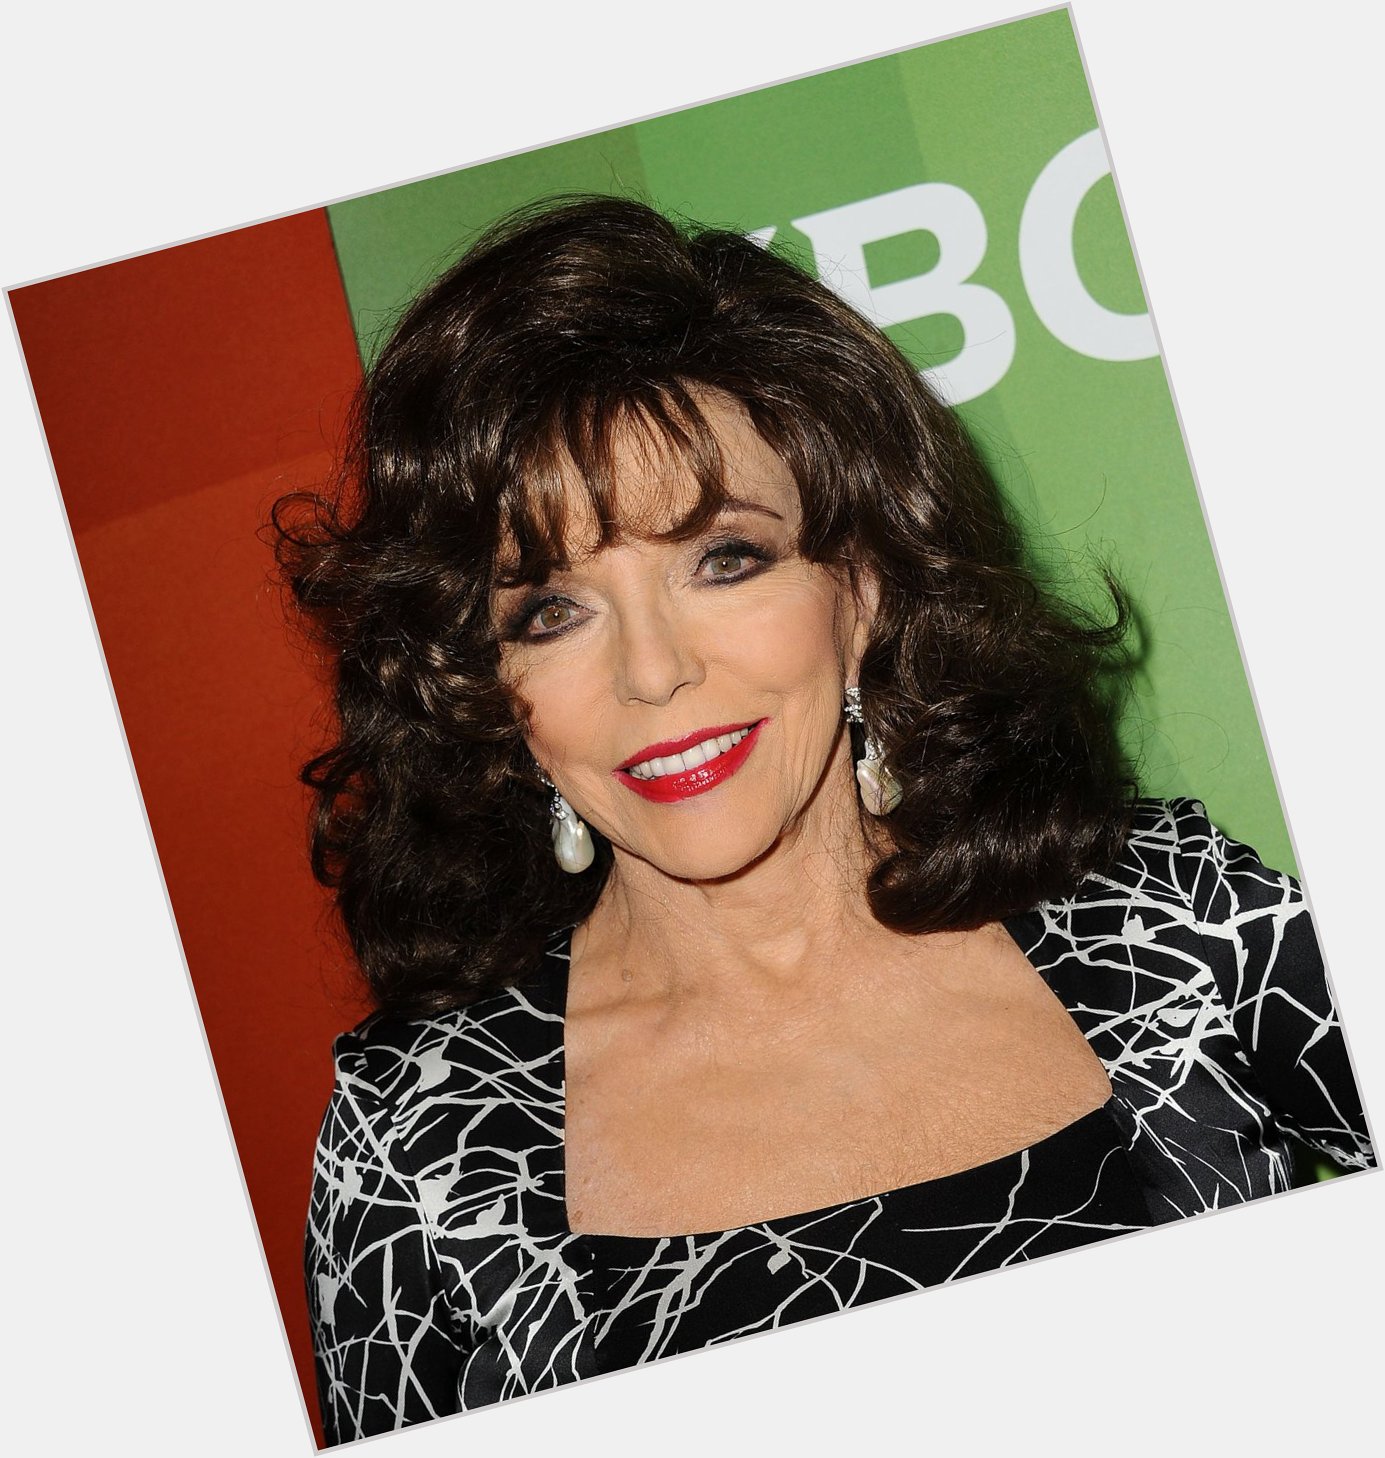 Happy Birthday Joan Collins! She\s 84 today! Three images courtesy of Doctor Macro. 